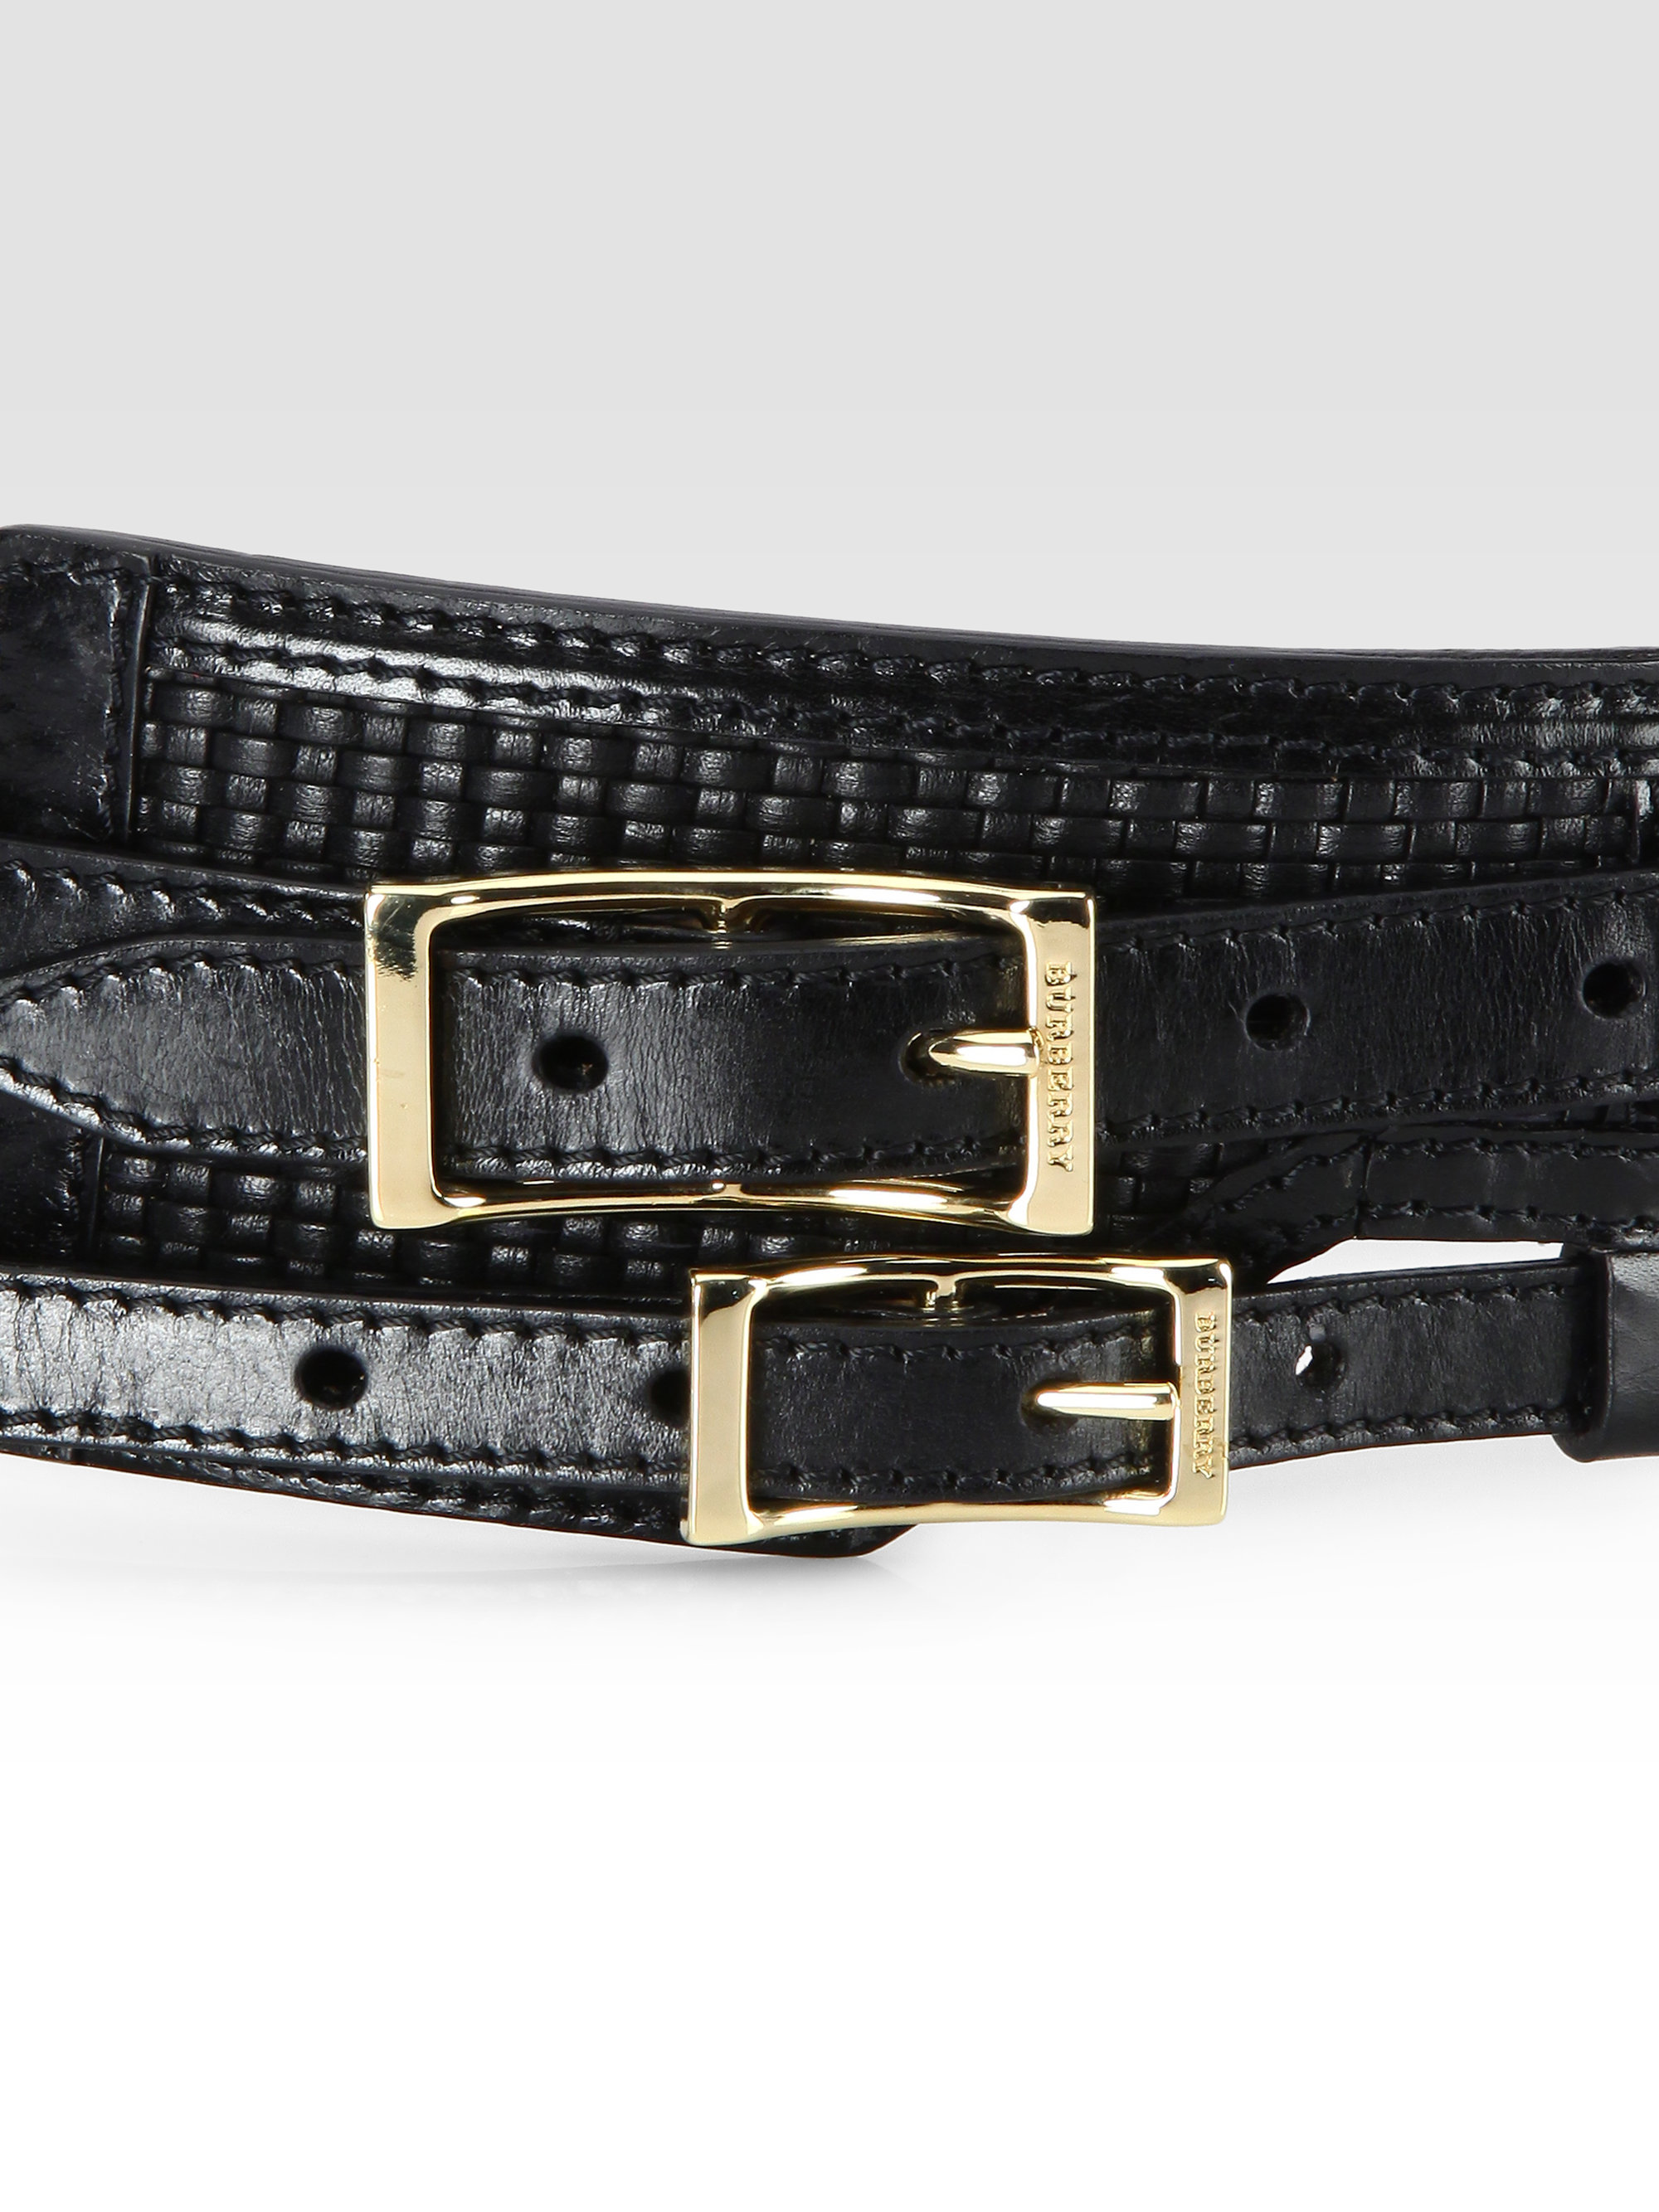 Burberry Leather Double B Buckle Belt , Size: S